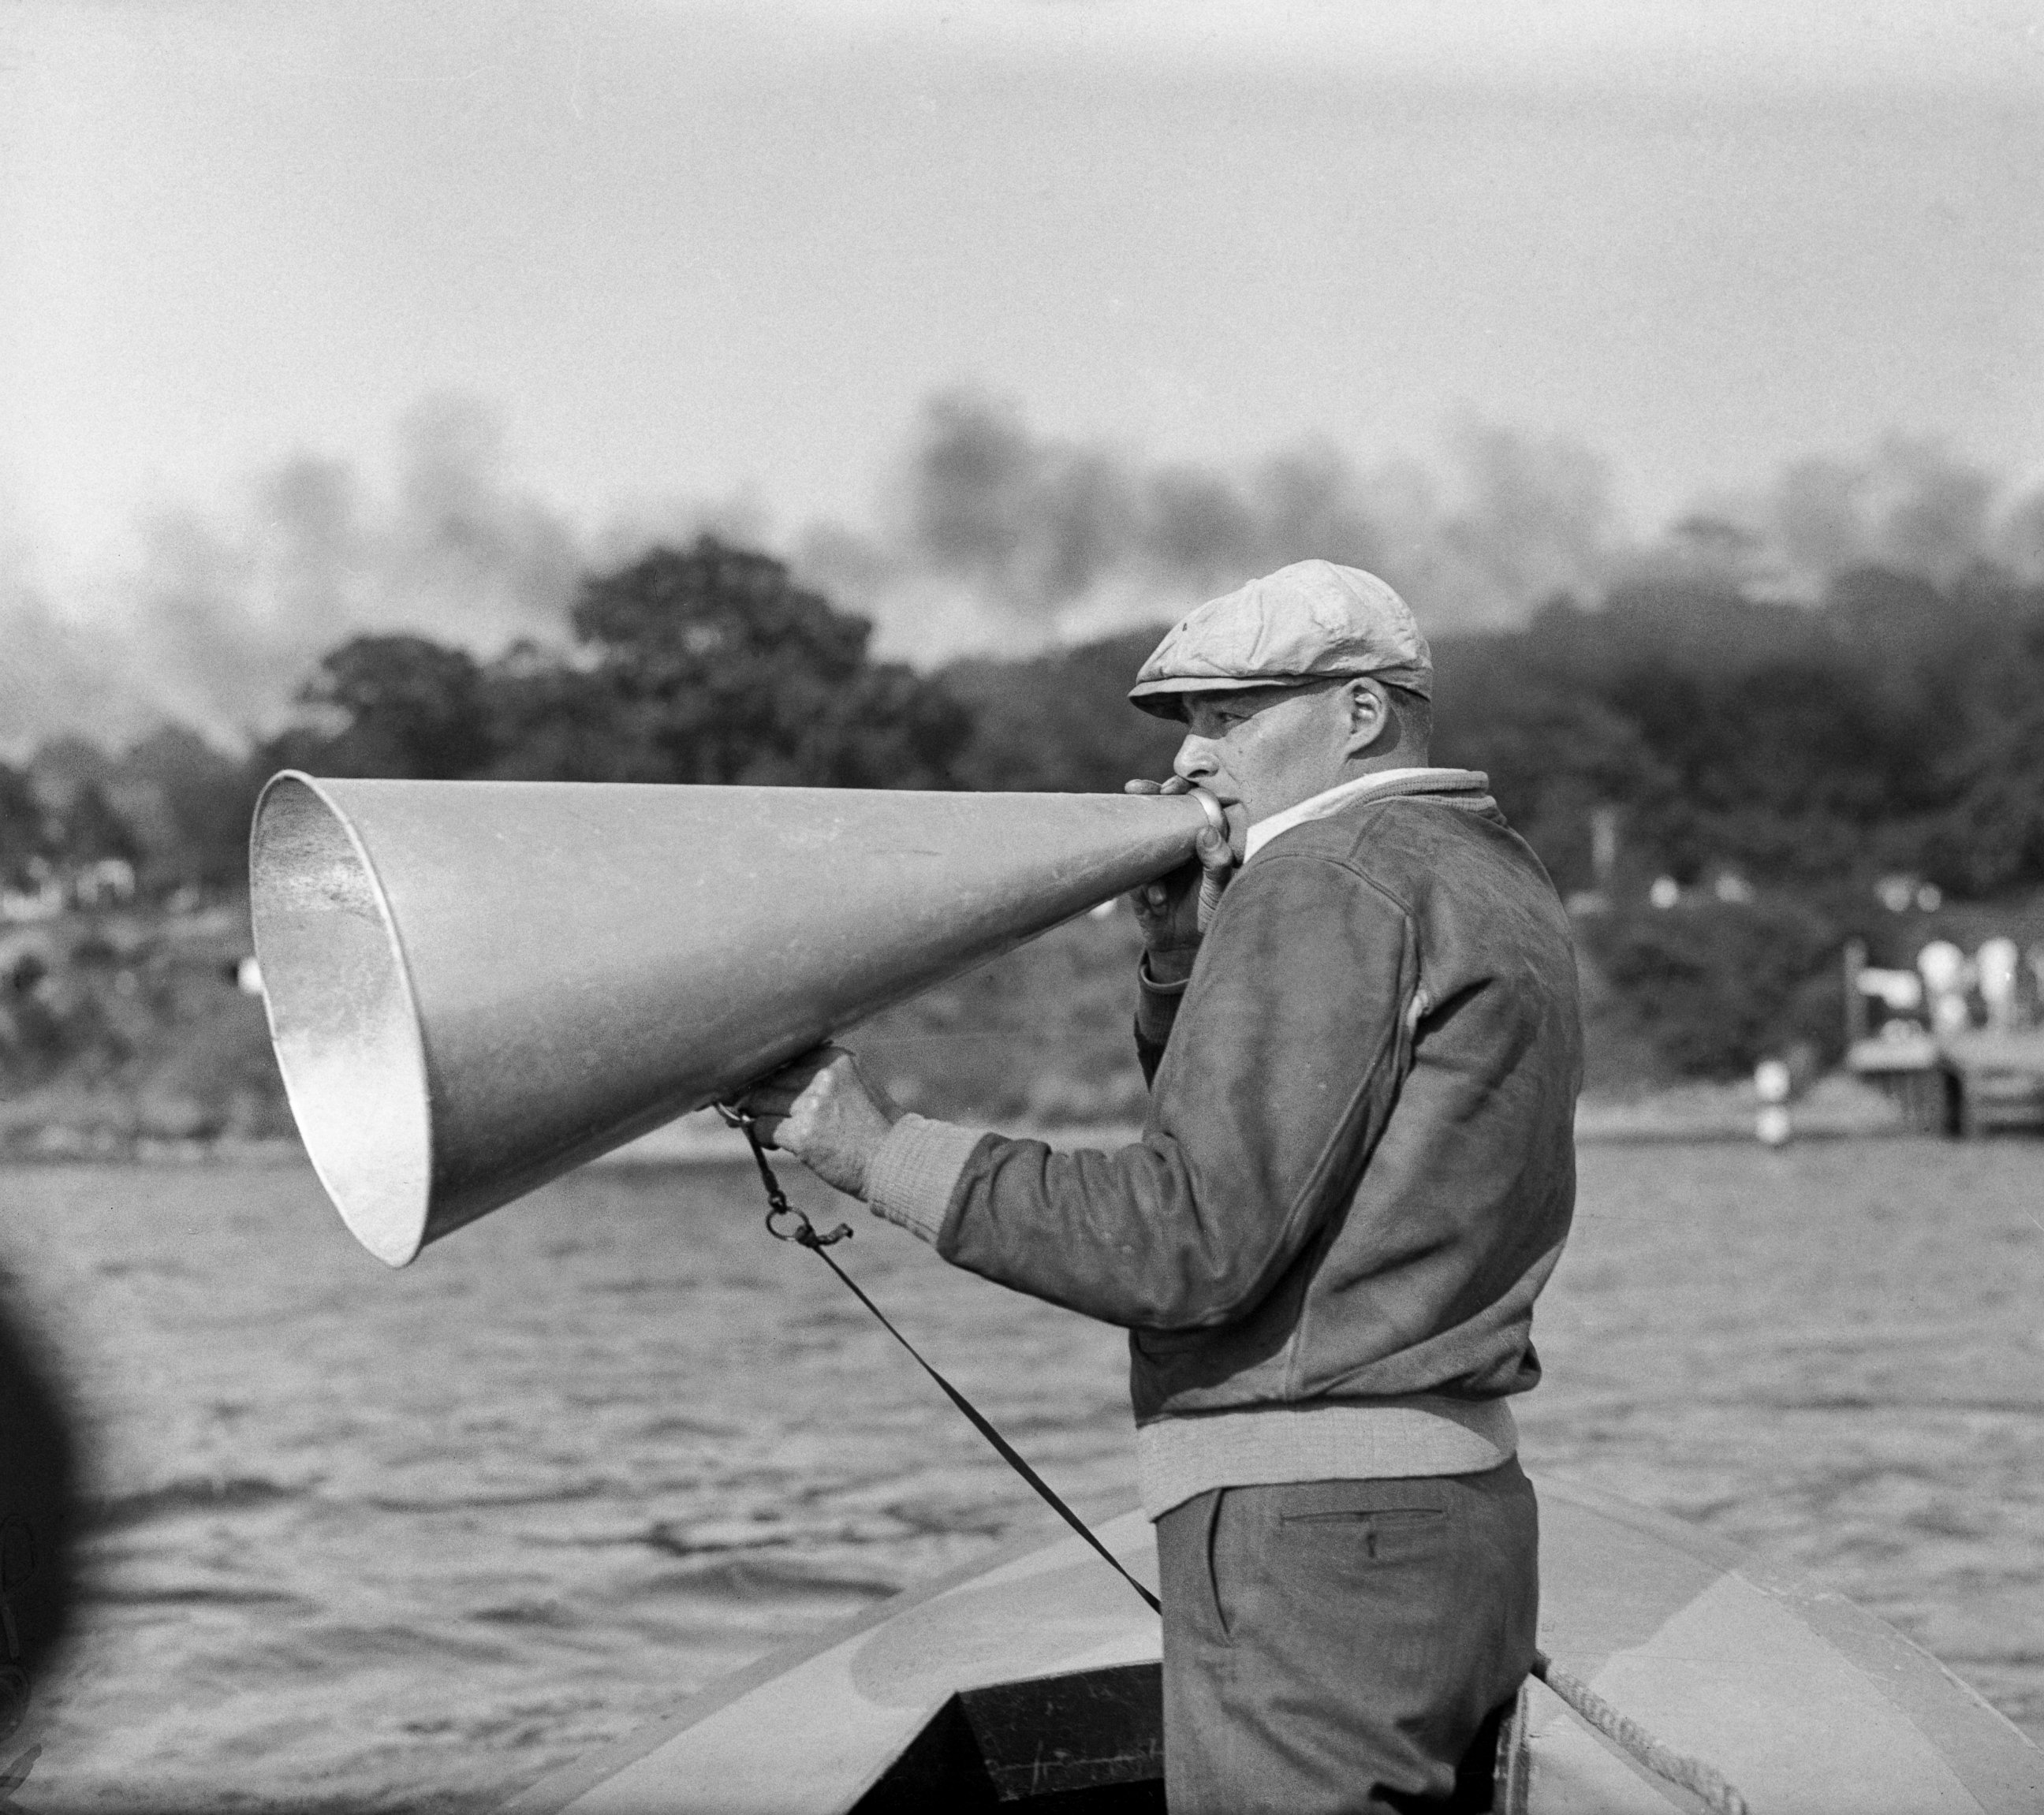 PHOTO: Charles Whiteside, coach of the Harvard University Crews, is seen here as he sent his men through their paces during a workout on the Thames River, Red Top, Connecticut, in preparation for the coming regatta against Yale University.